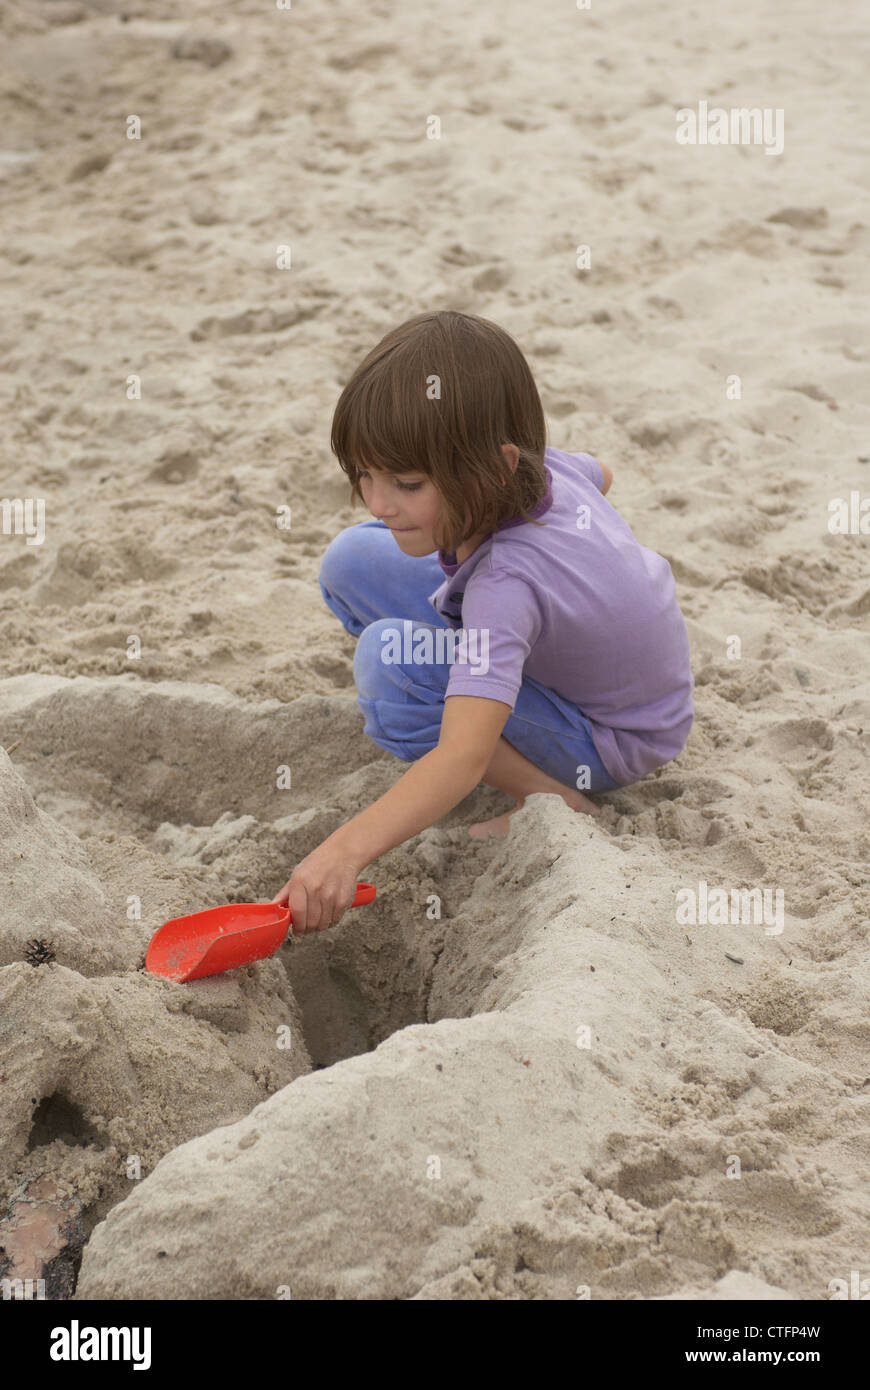 Child Girl (5-7 years old) making a sandcastle on the beach Stock Photo